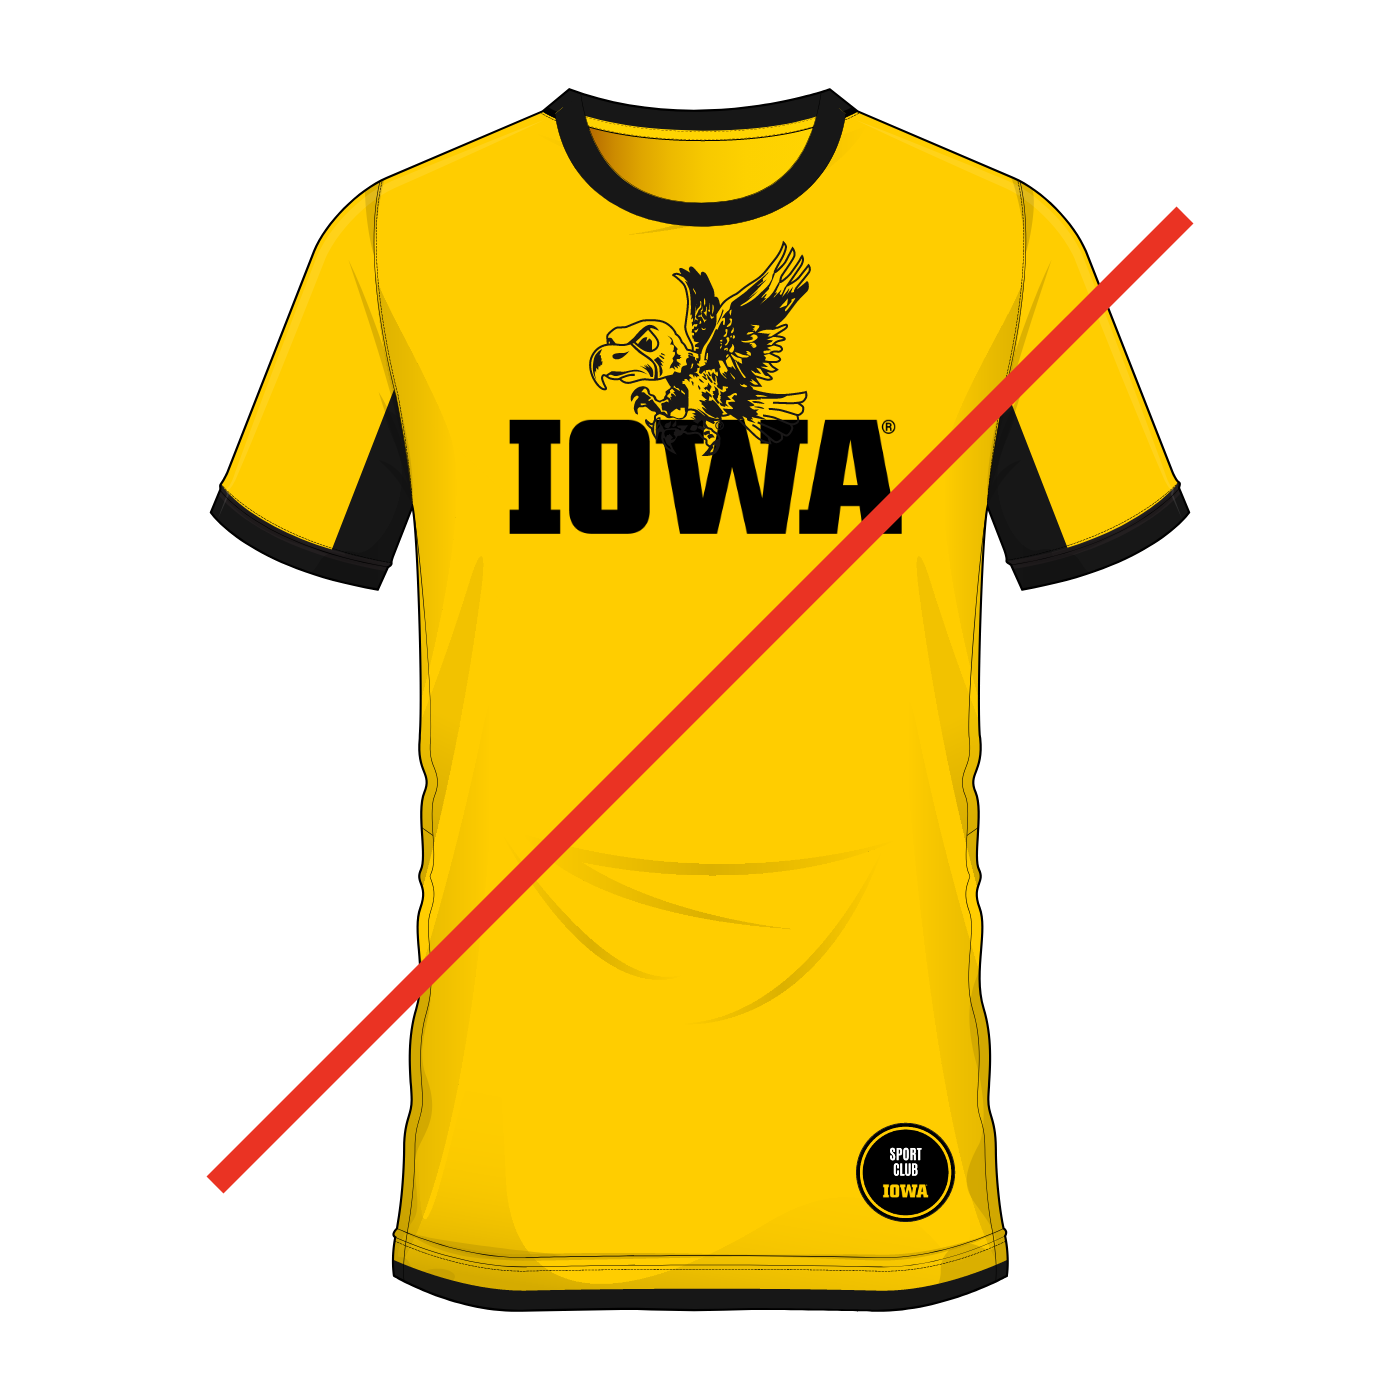 Prohibited example showing the Flying Herky combined with the block IOWA logo on the front of a jersey